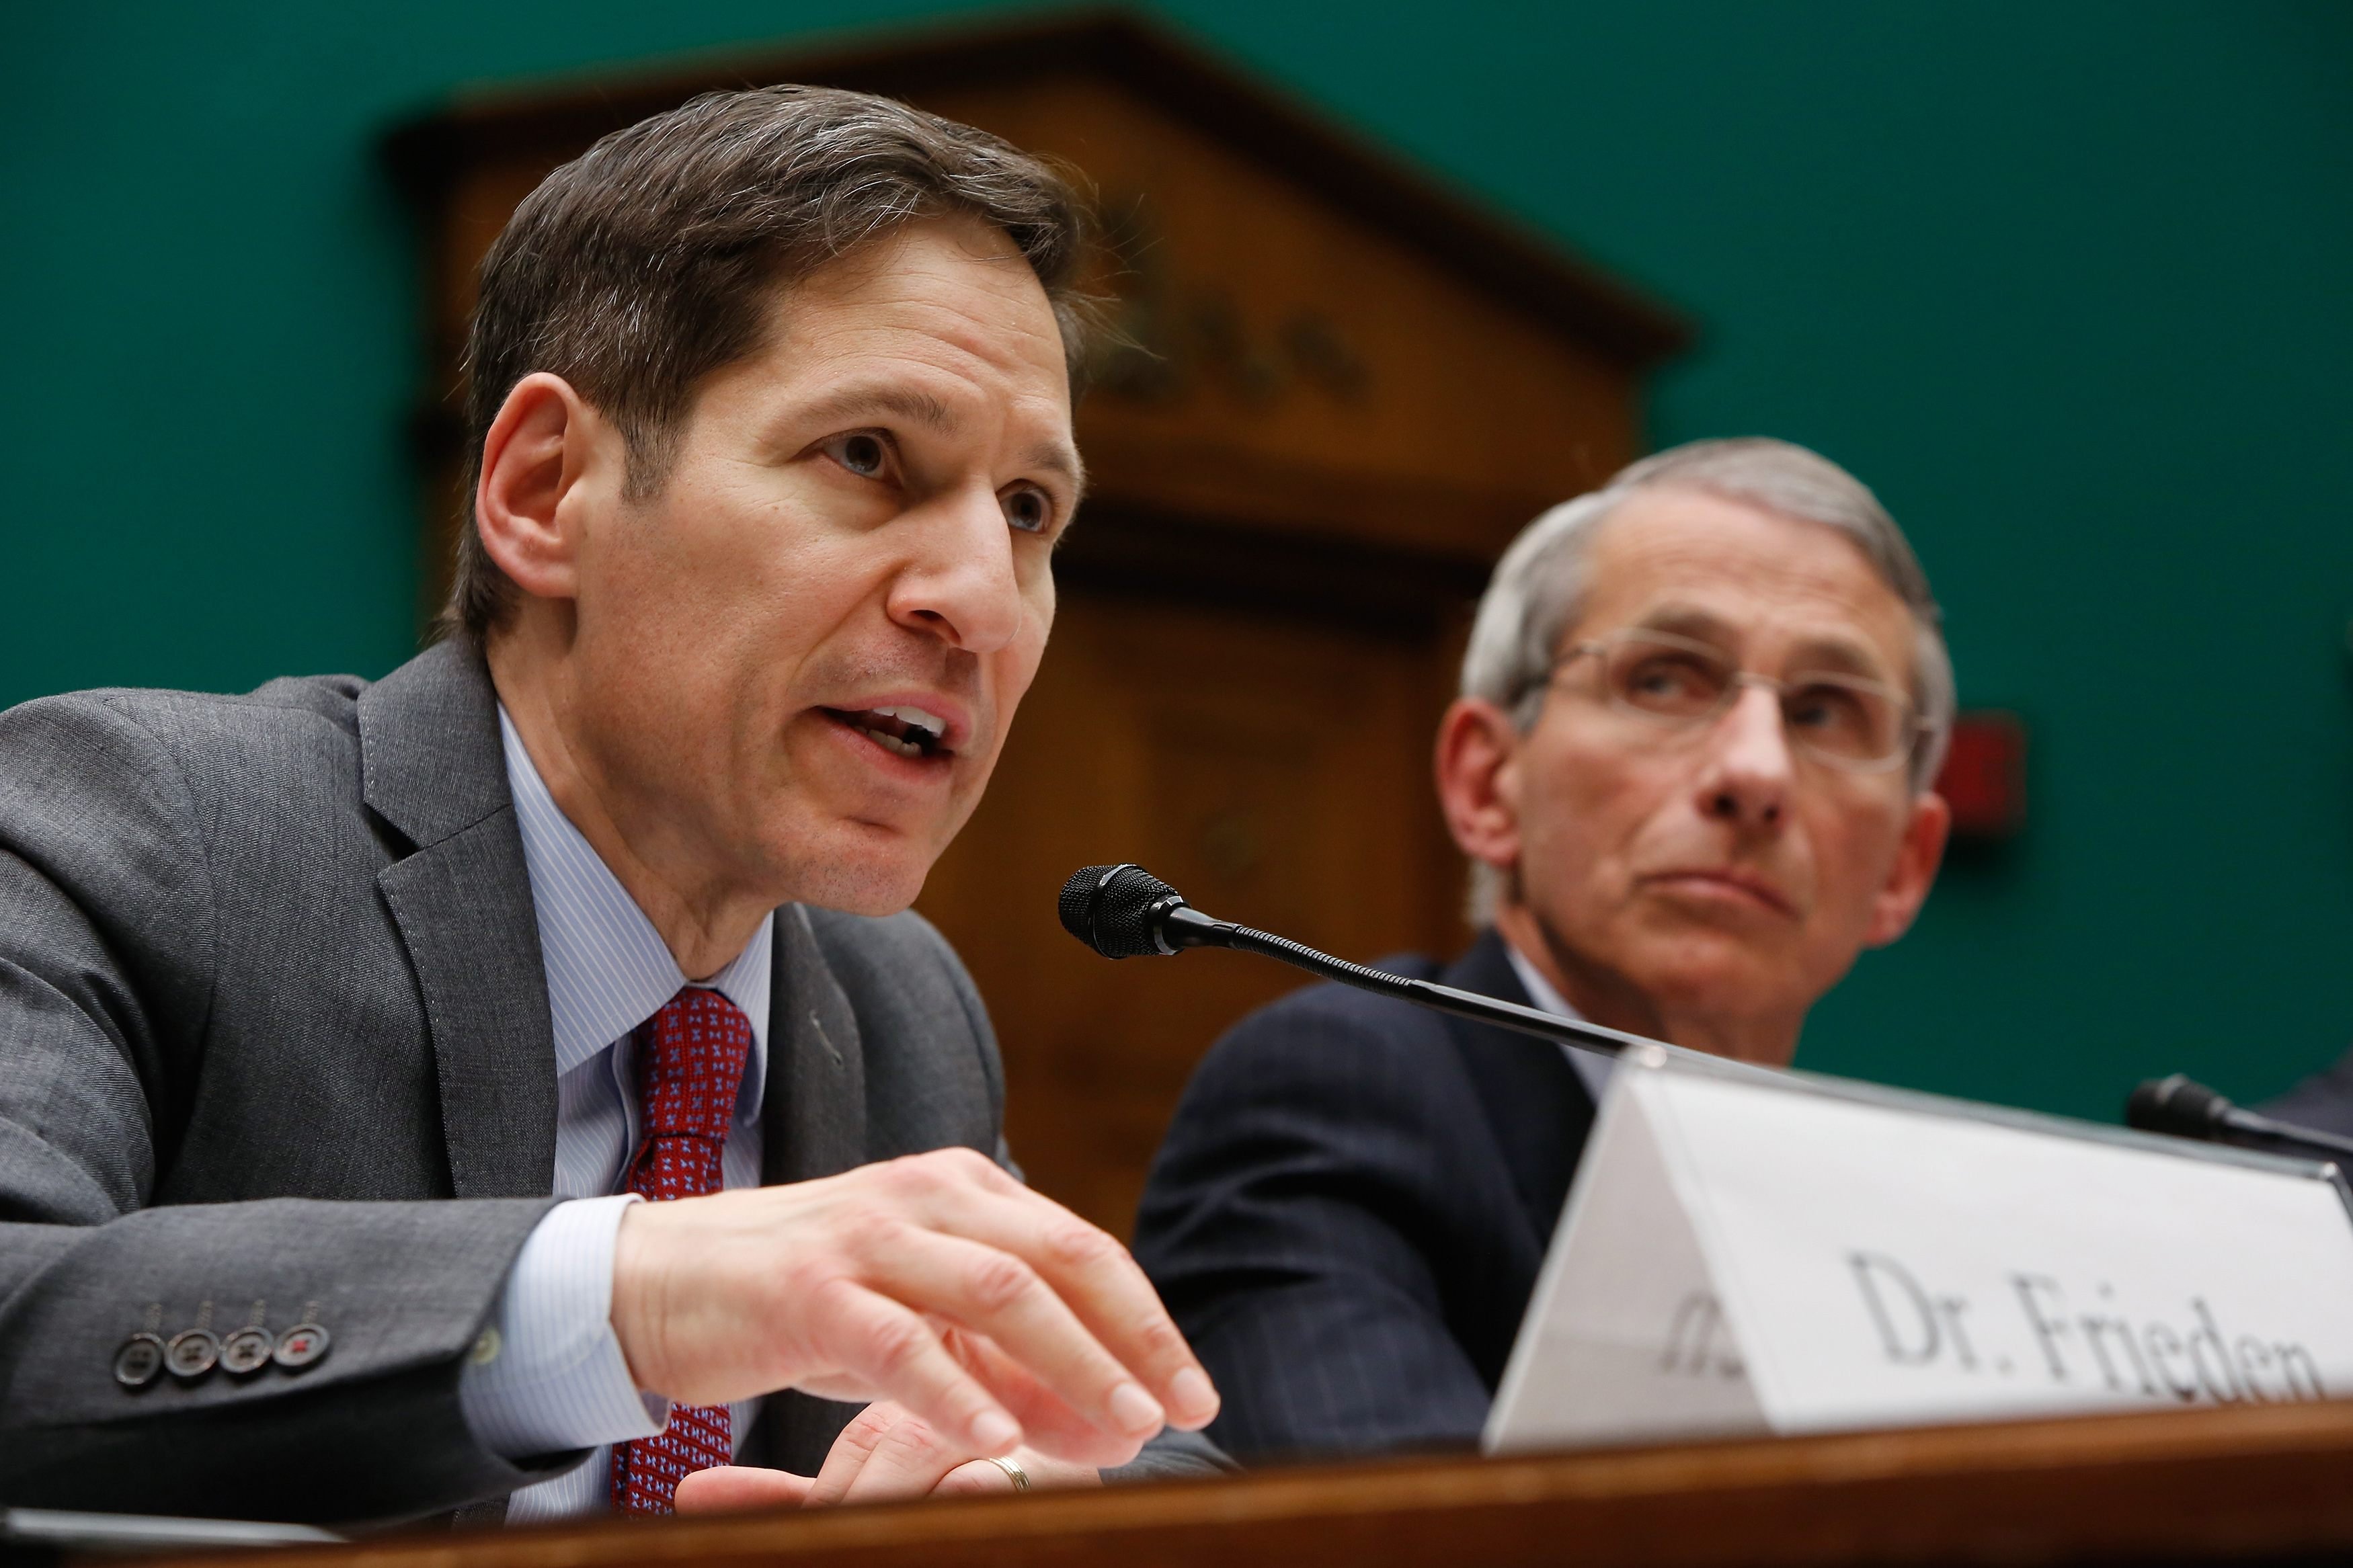 Frieden and Fauci testify before a House Energy and Commerce Oversight and Investigations Subcommittee hearing on the U.S. response to the Ebola crisis, in Washington